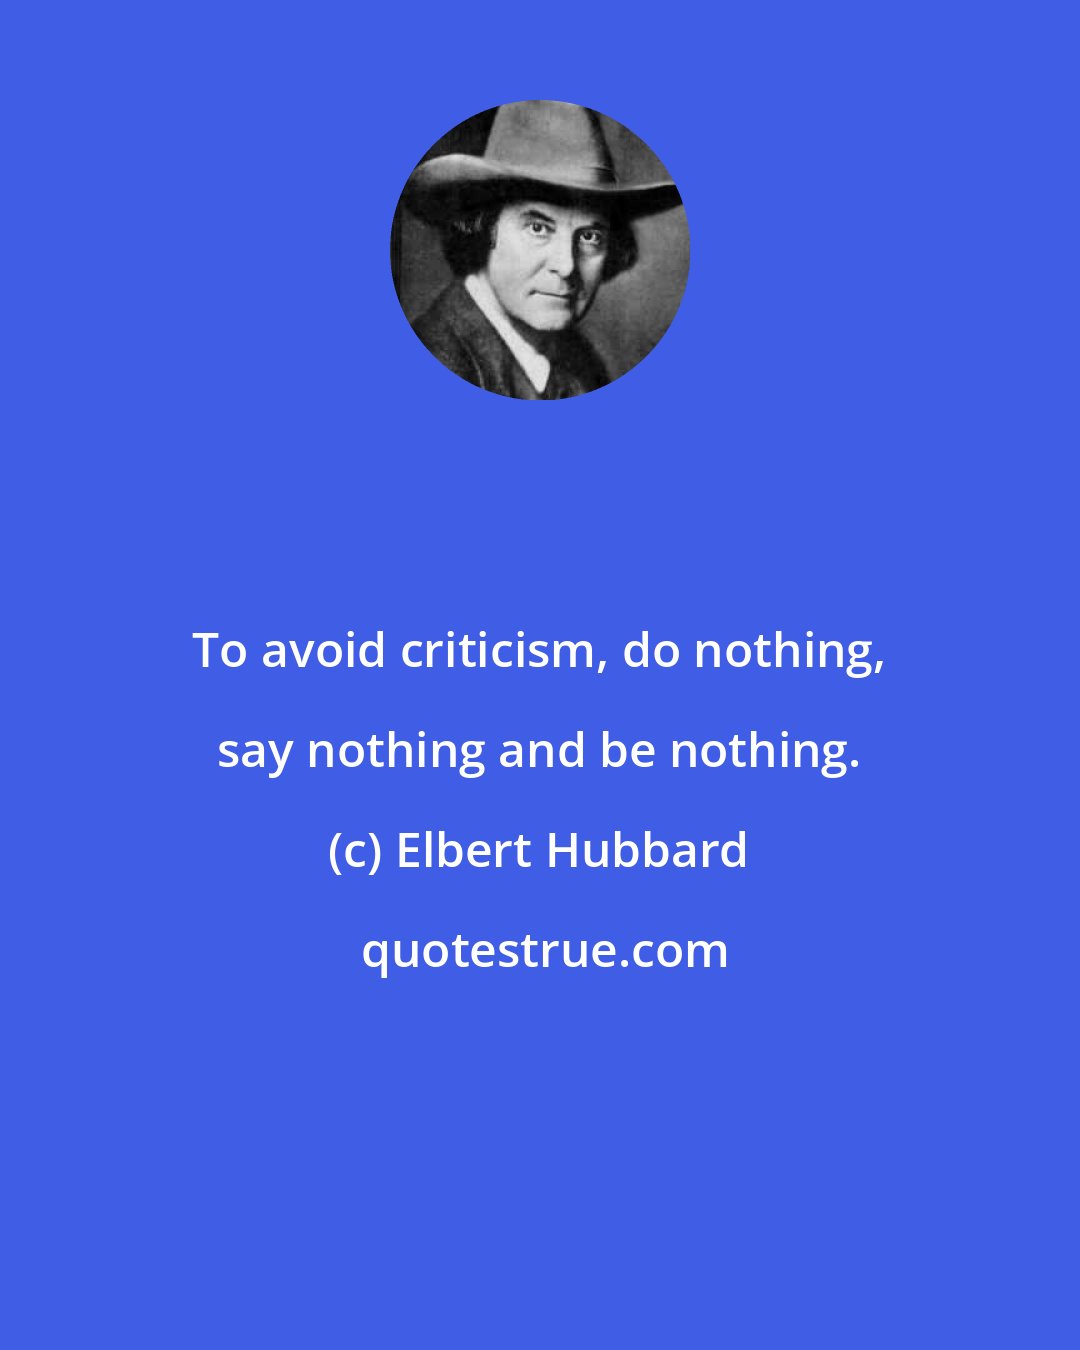 Elbert Hubbard: To avoid criticism, do nothing, say nothing and be nothing.